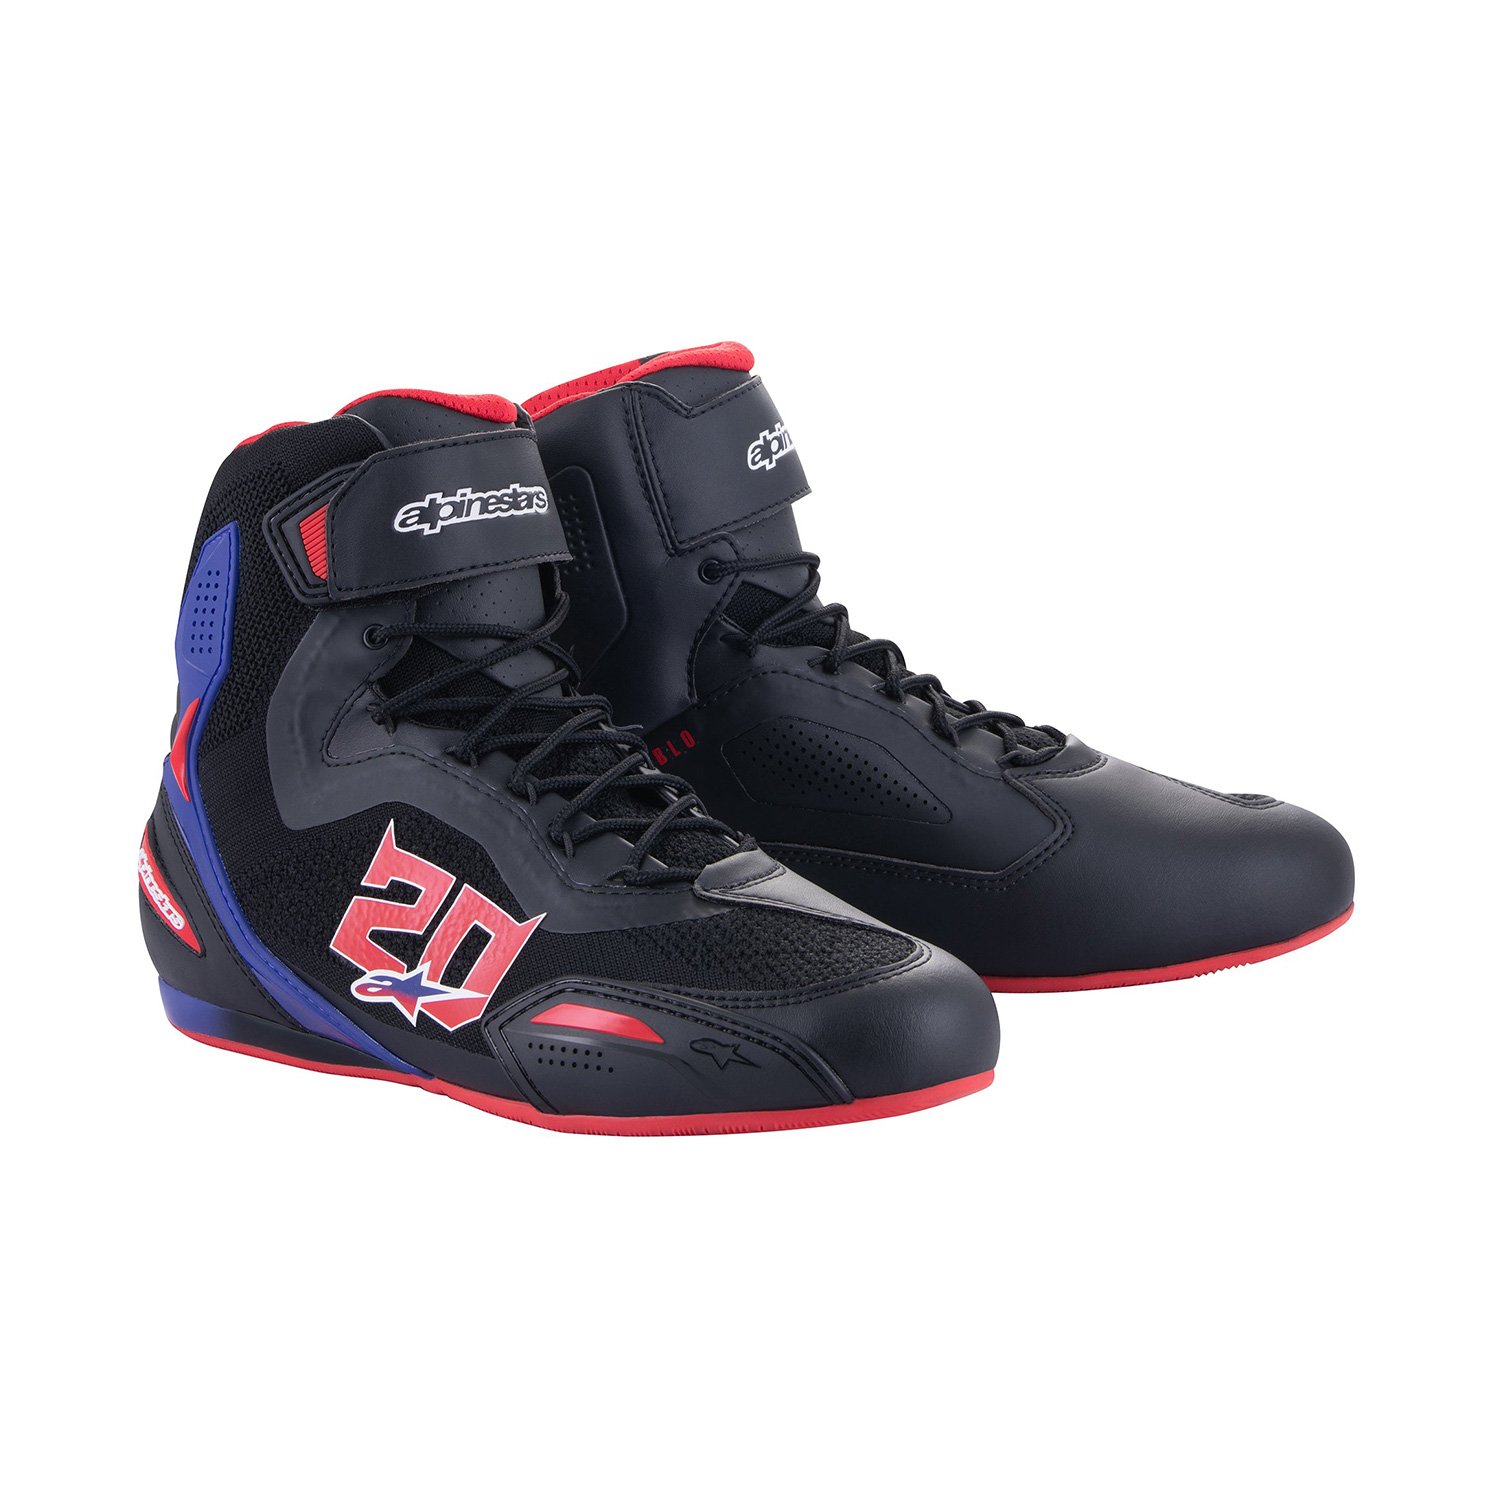 Image of Alpinestars FQ20 Faster-3 Rideknit Noir Bright Rouge Bleu Chaussures Taille US 9